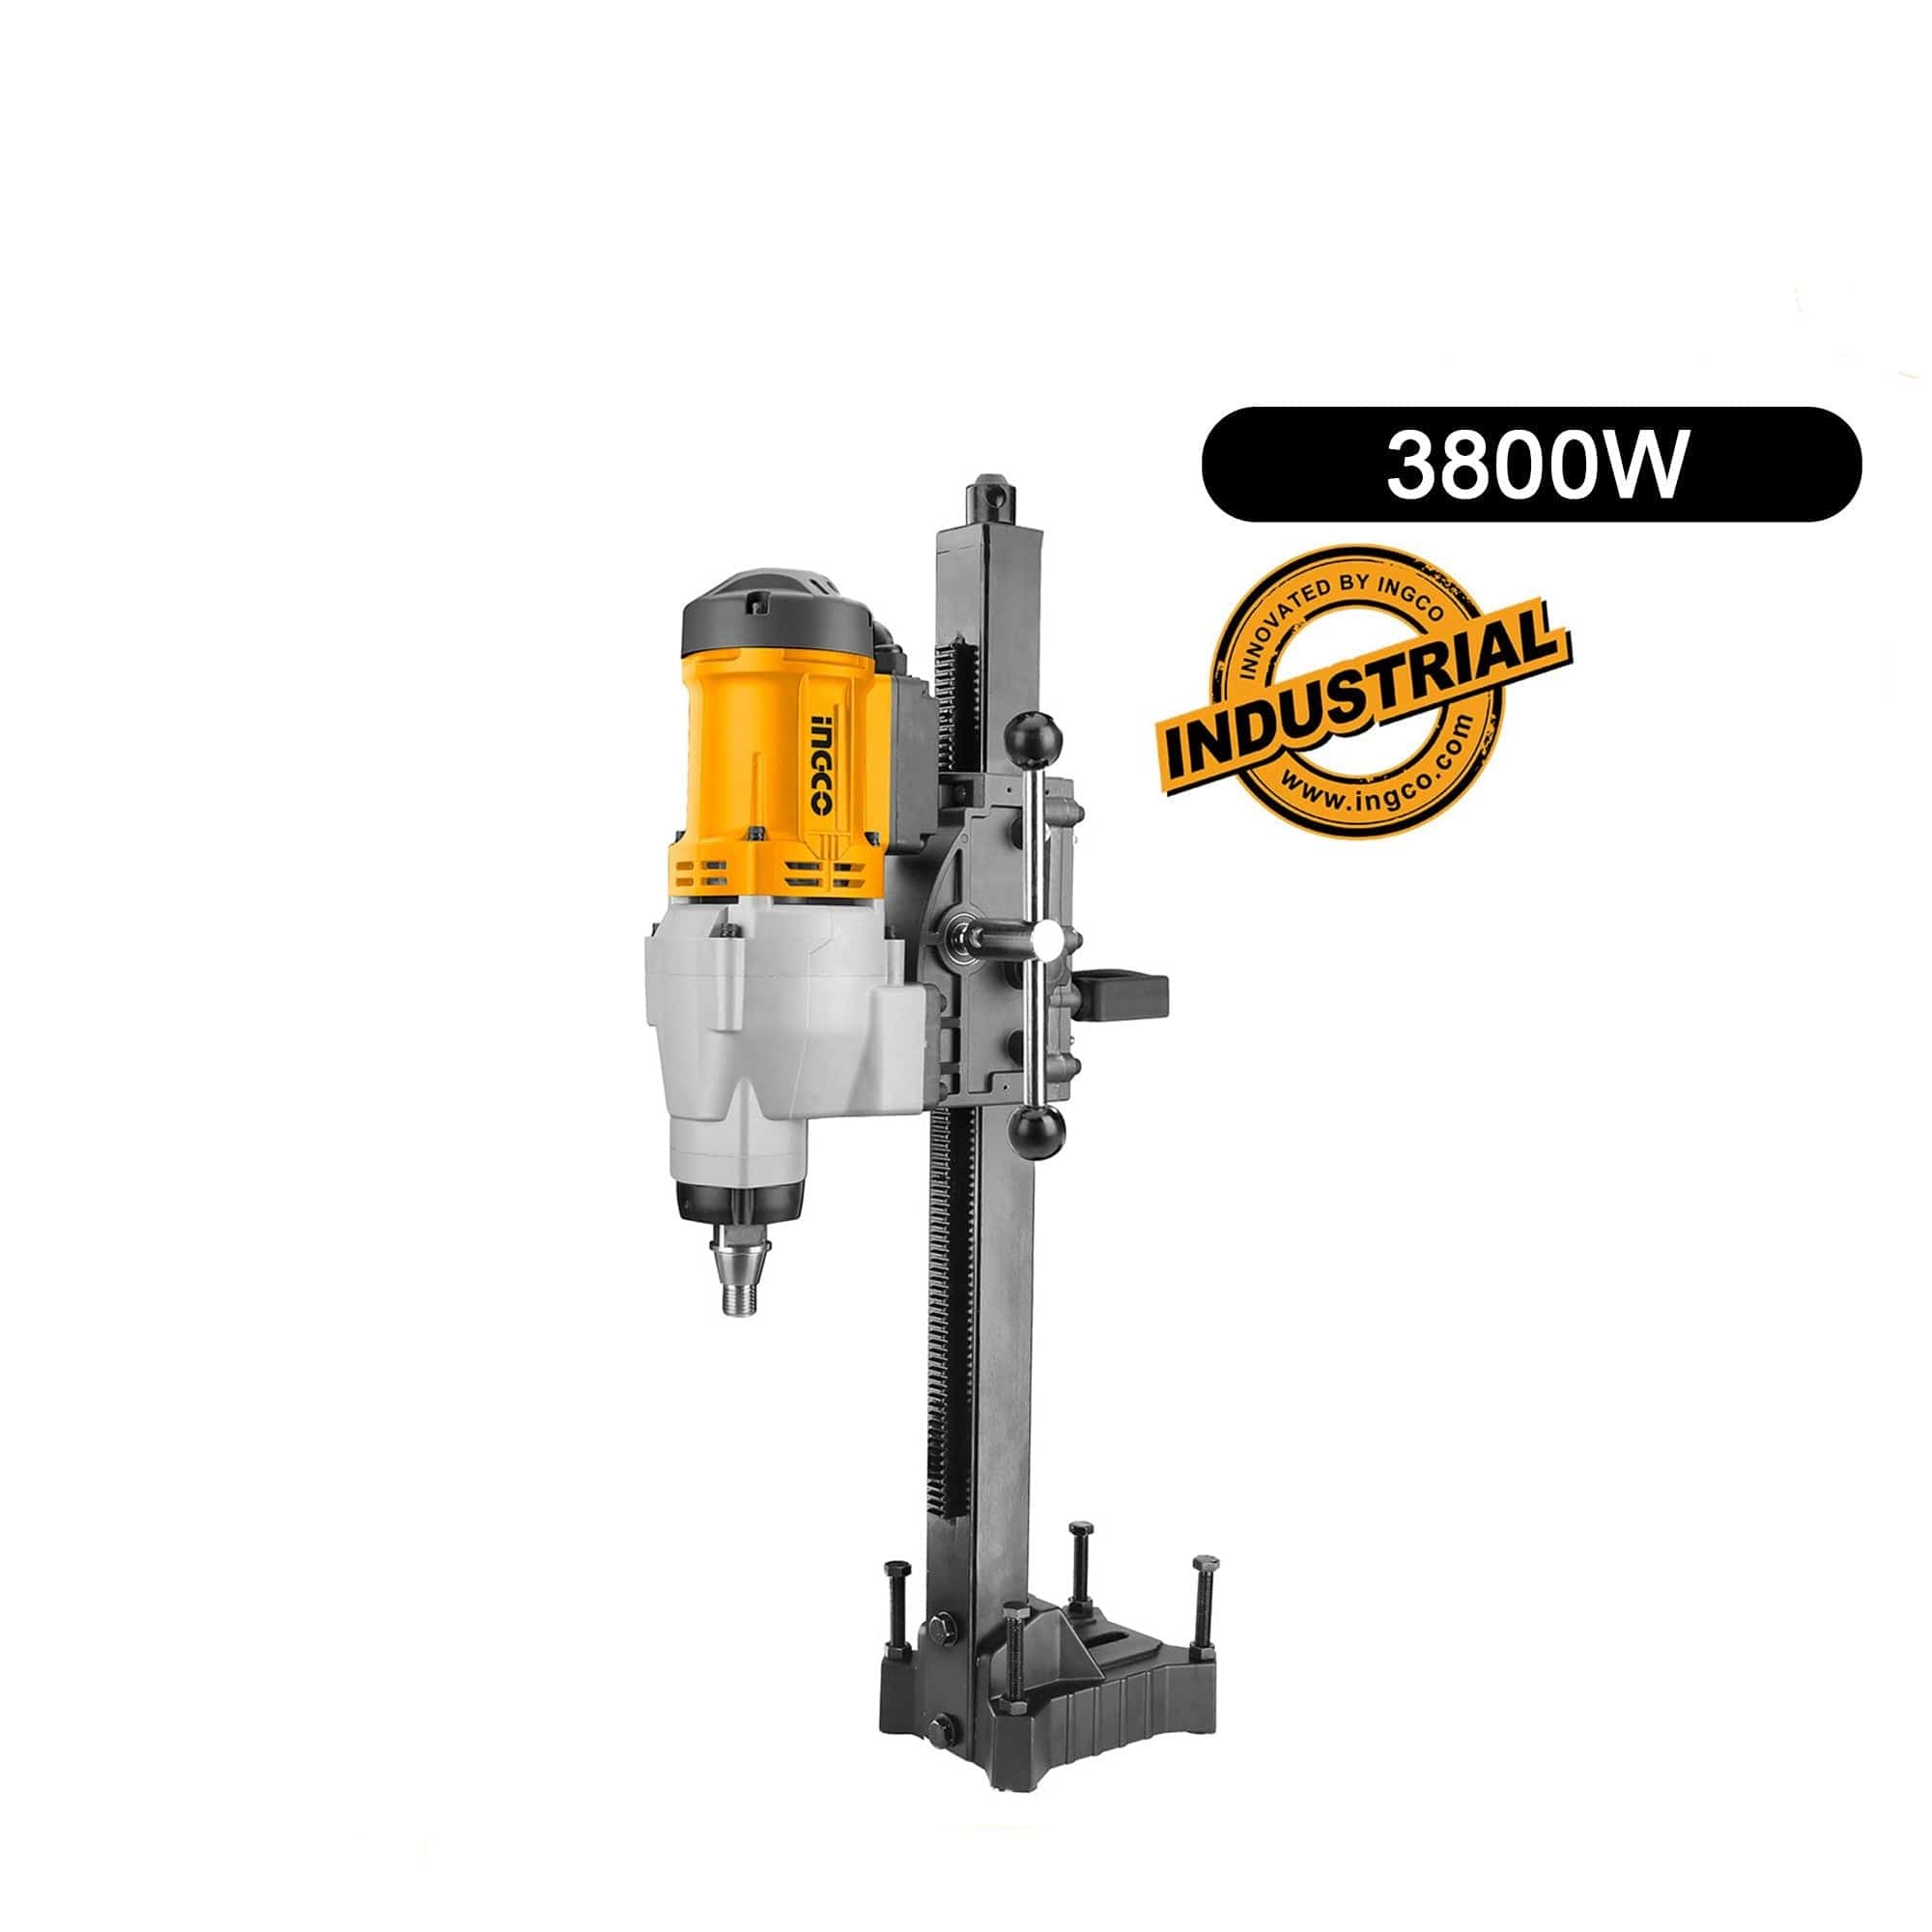 Ingco 3800W Diamond Drilling Machine - DDM38001 | Supply Master | Accra, Ghana Drill Buy Tools hardware Building materials